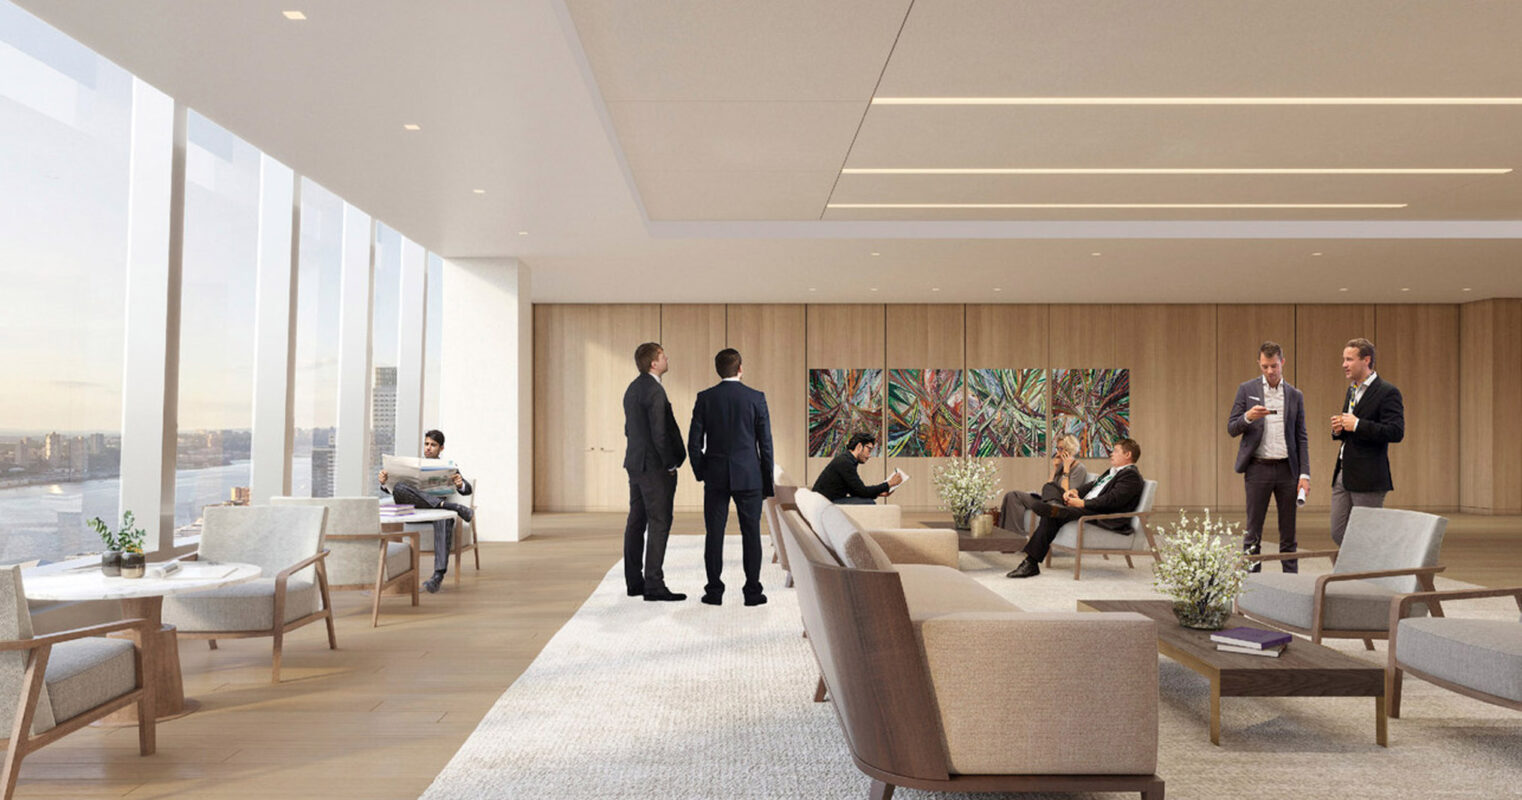 Modern office lounge featuring natural light, panoramic views. Neutral palette with wood accents creates a warm, inviting space. Contemporary furniture, strategic seating areas facilitate interaction. Art piece adds vibrant color, focal point.